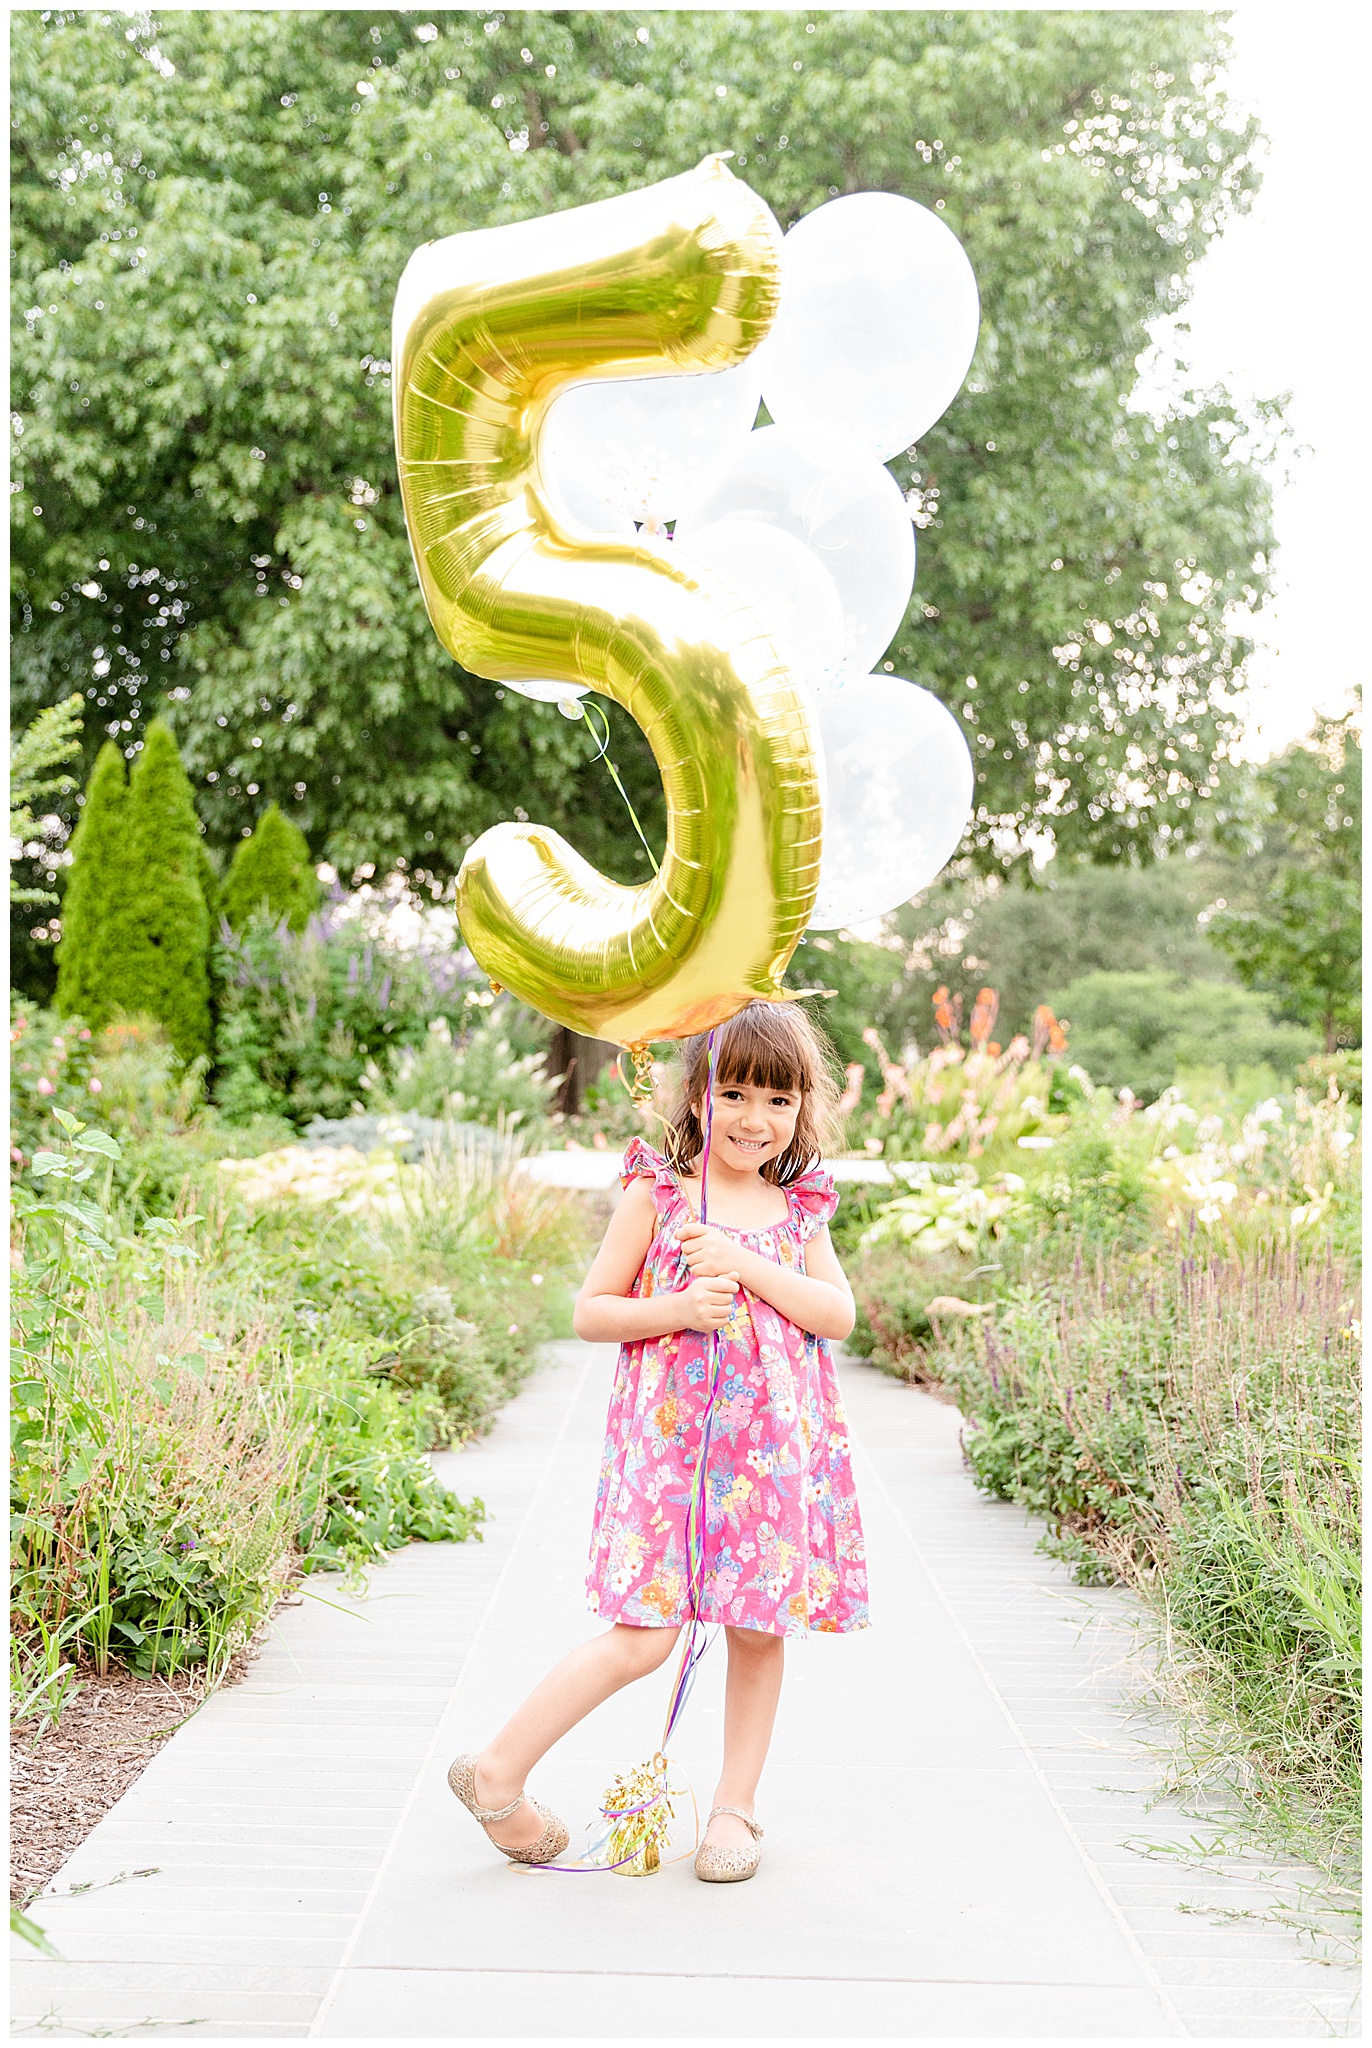 Five Year Old Balloons for Garden Milestone Session with Kofmehl Photography